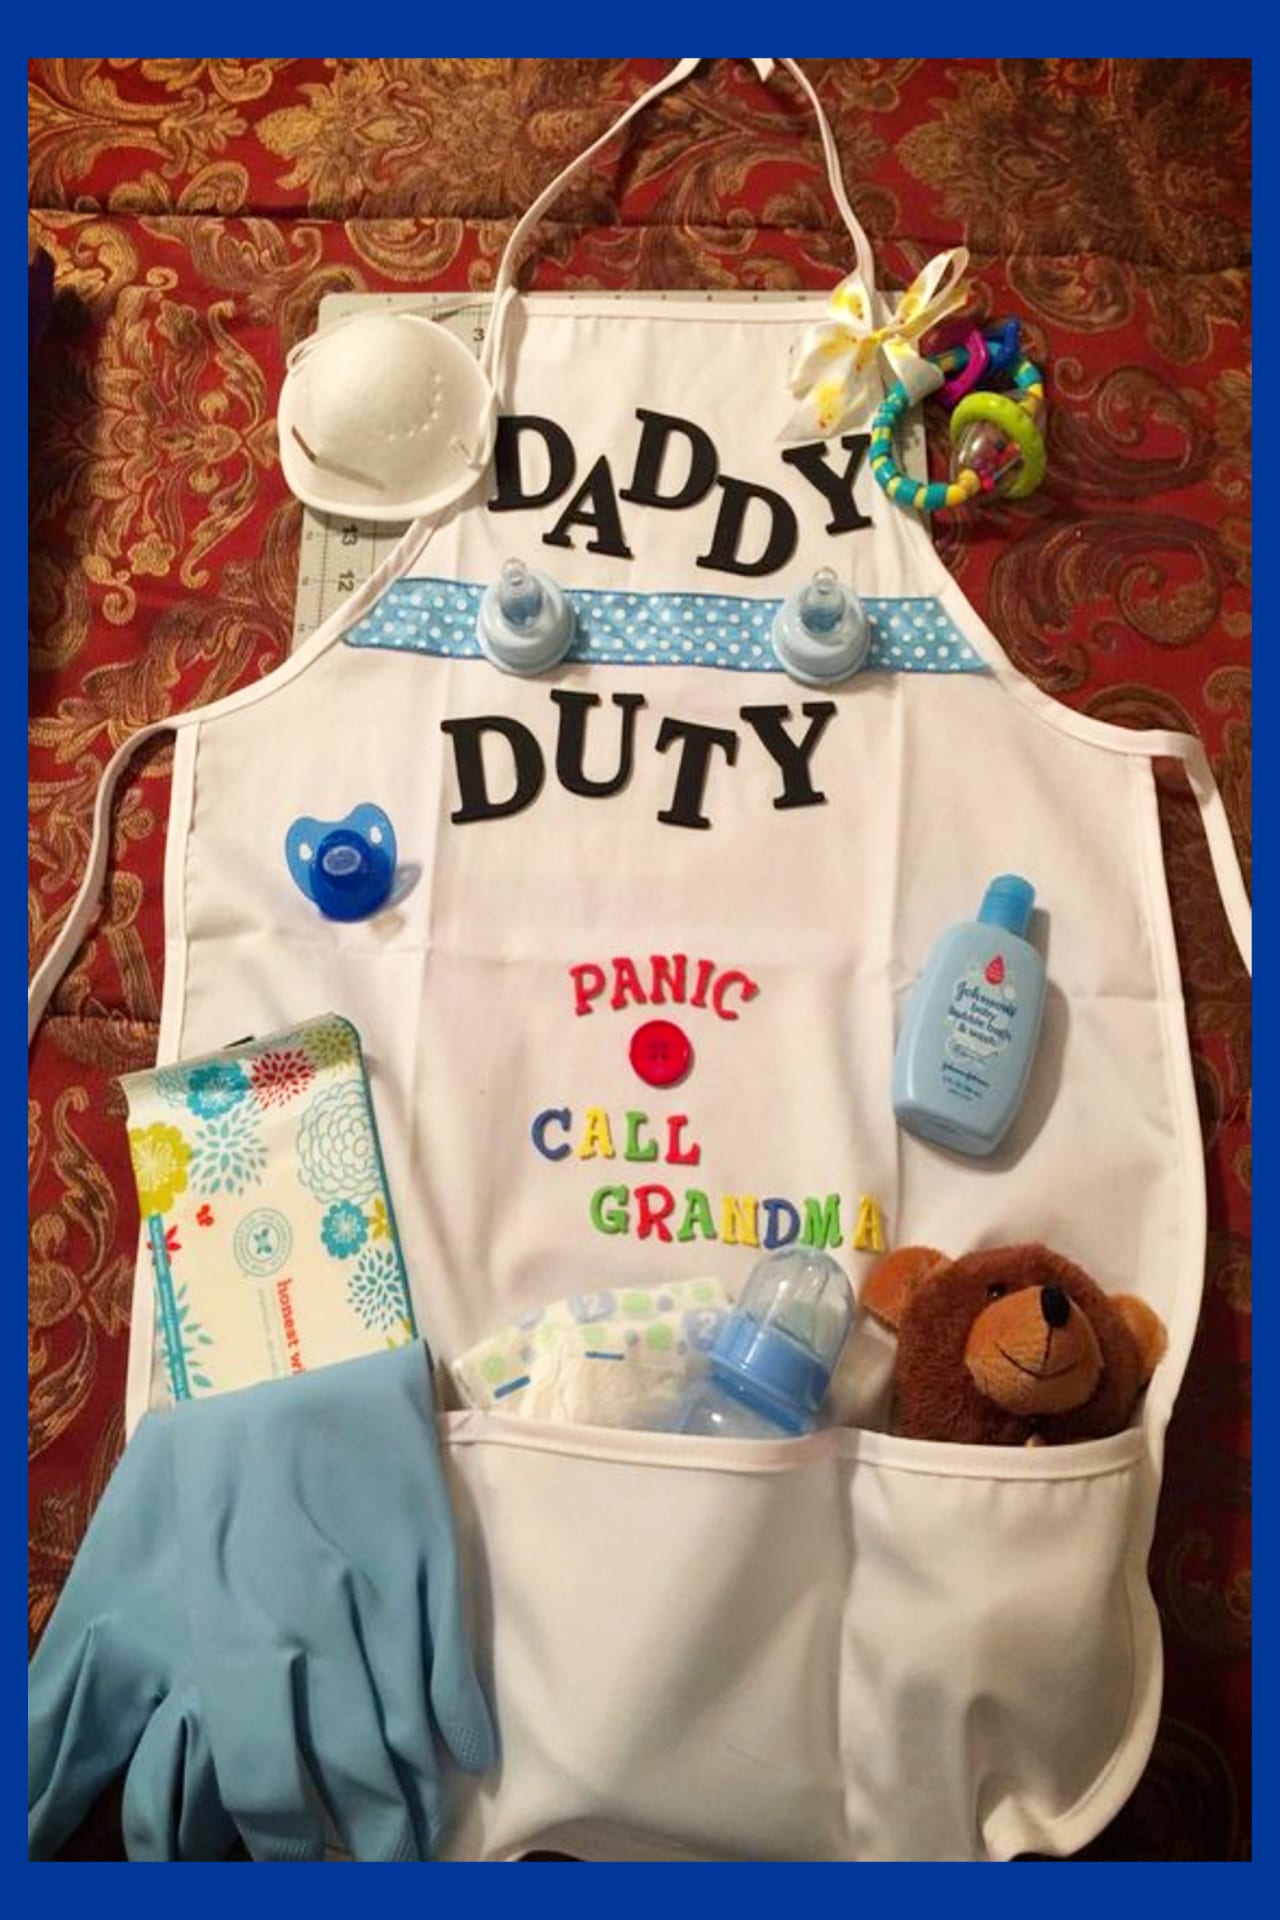 Baby shower gifts for dad to be - DIY baby gift for dad and father to be gift ideas - daddy survival kits and funny homemade baby shower gifts for first time dads - Going to a coed baby shower?  These couples baby shower gift ideas on a budget are cheap and easy homemade gift ideas for the new dad.